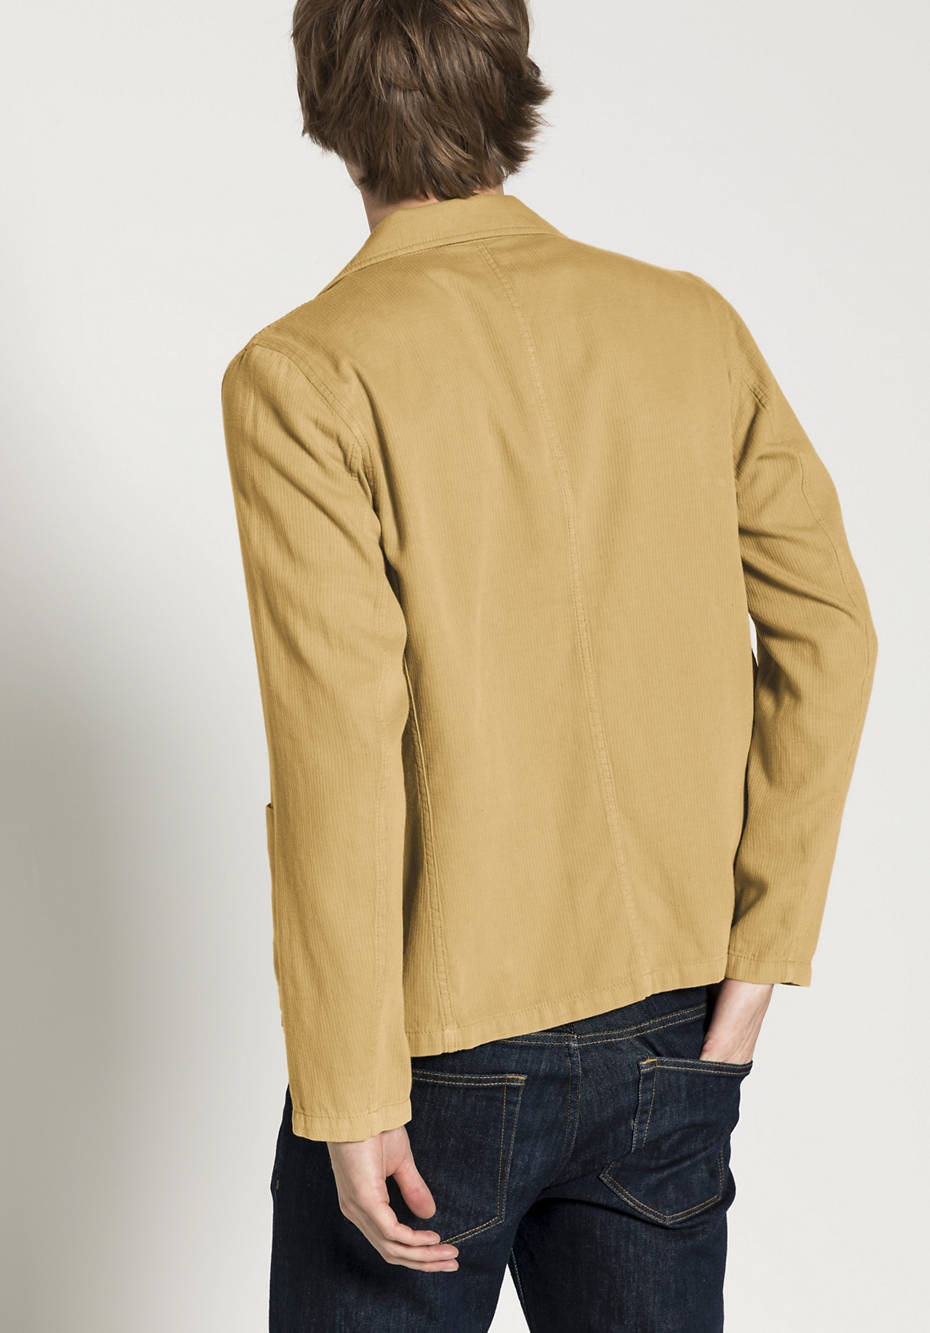 Casual jacket made of organic cotton with linen